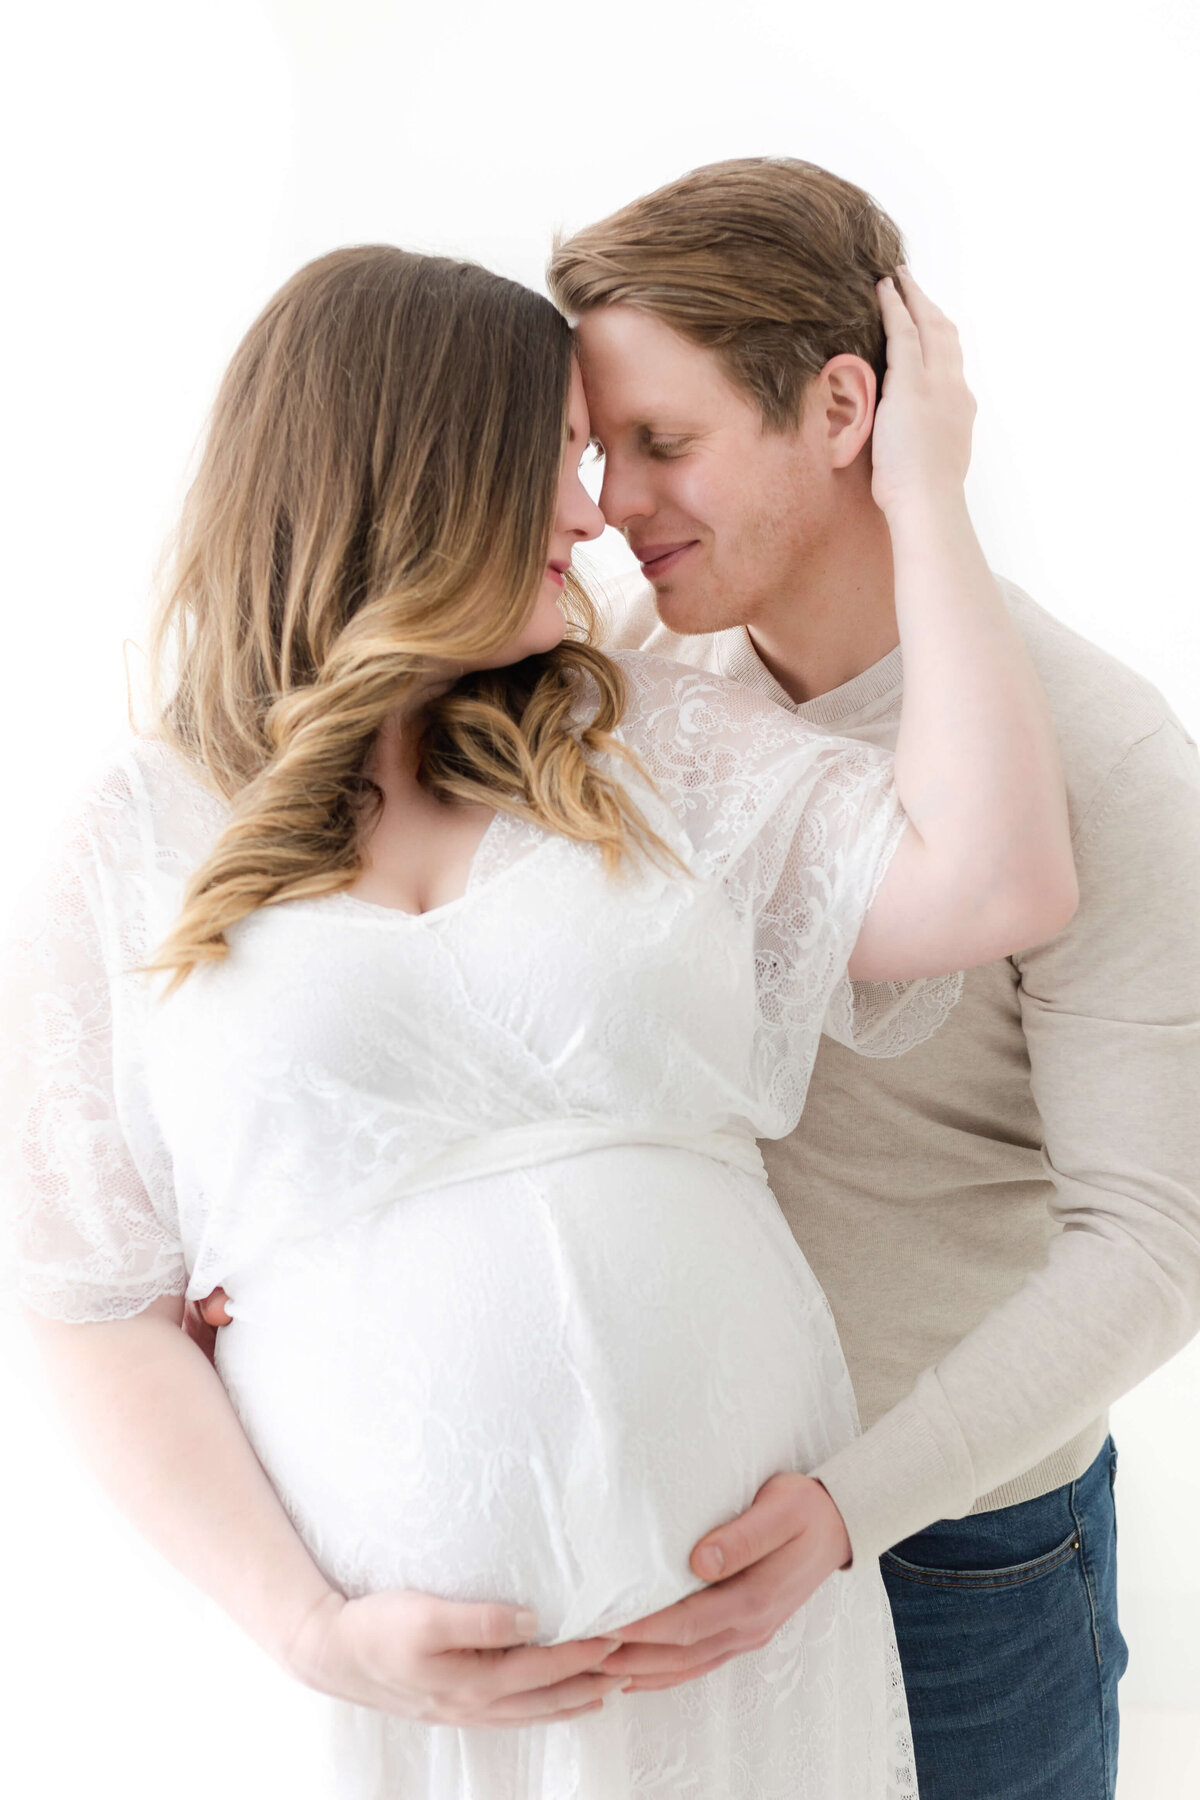 Pregnant mama in white lace dress in studio with her husband holding a hand on her belly. Captured by Collingwood Maternity Photographer Jennifer Walton